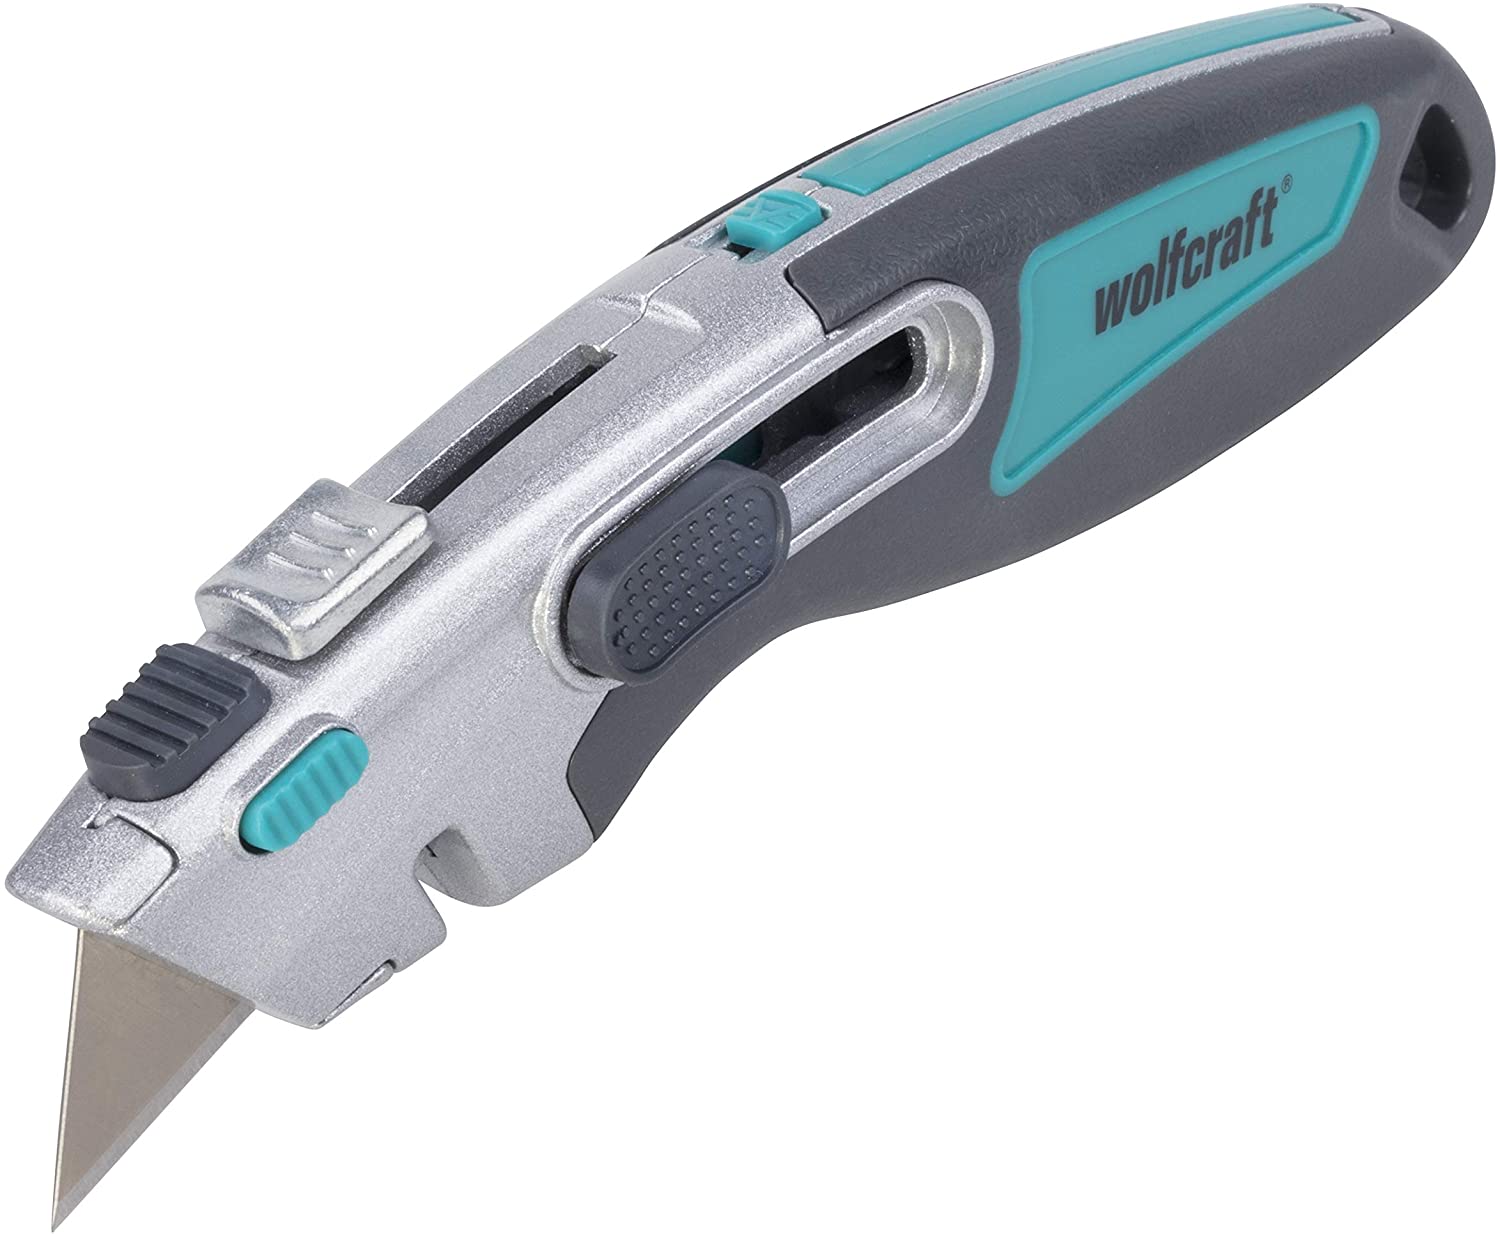 wolfcraft Dual Trapezoidal Blade Knife 4106000 - Sharp Trapezoidal Blade for Handymen and DIY - Includes Autolock and Safety Function